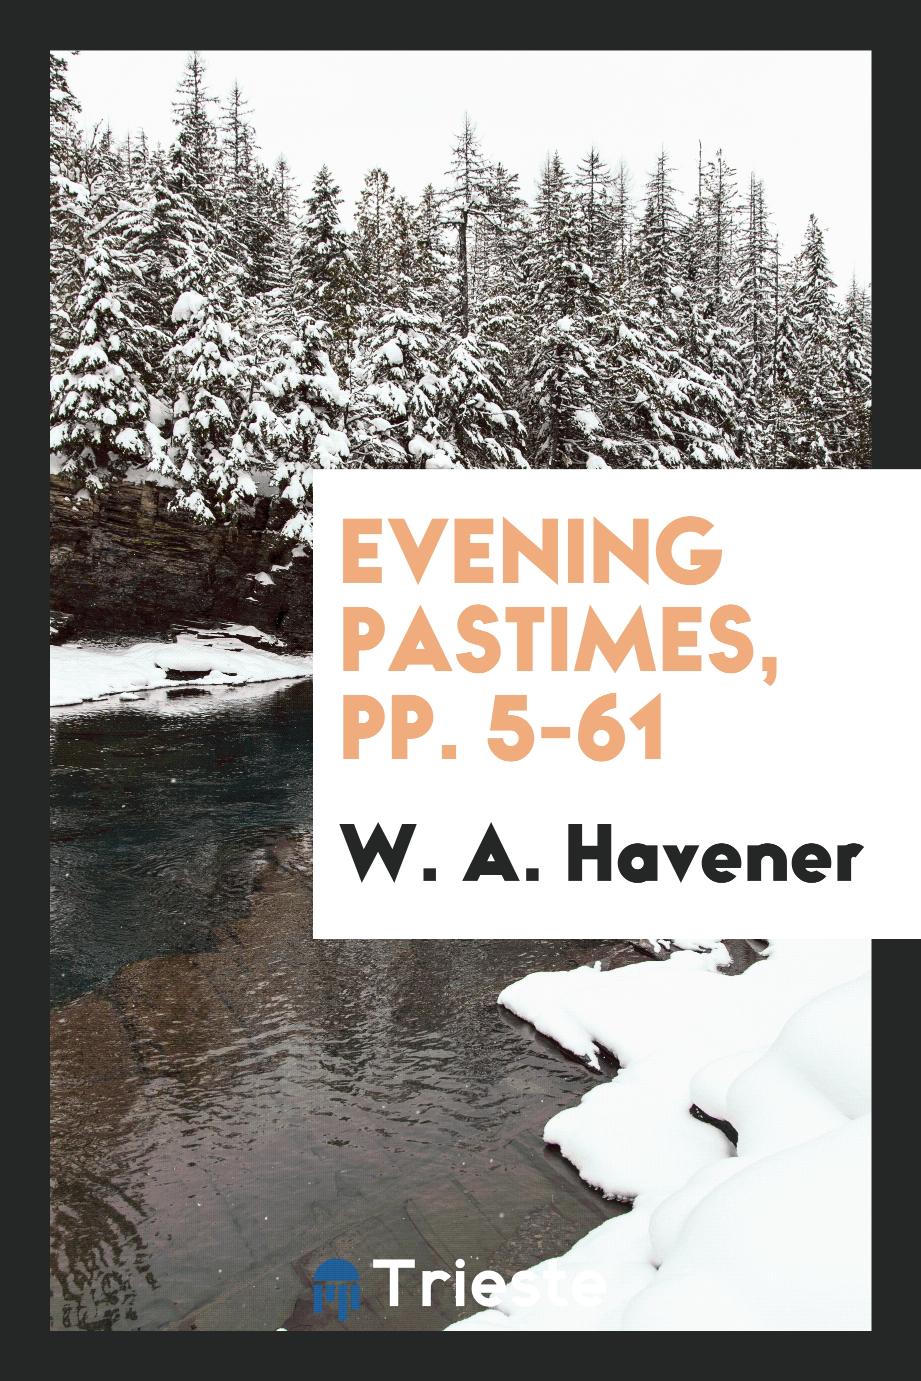 Evening Pastimes, pp. 5-61